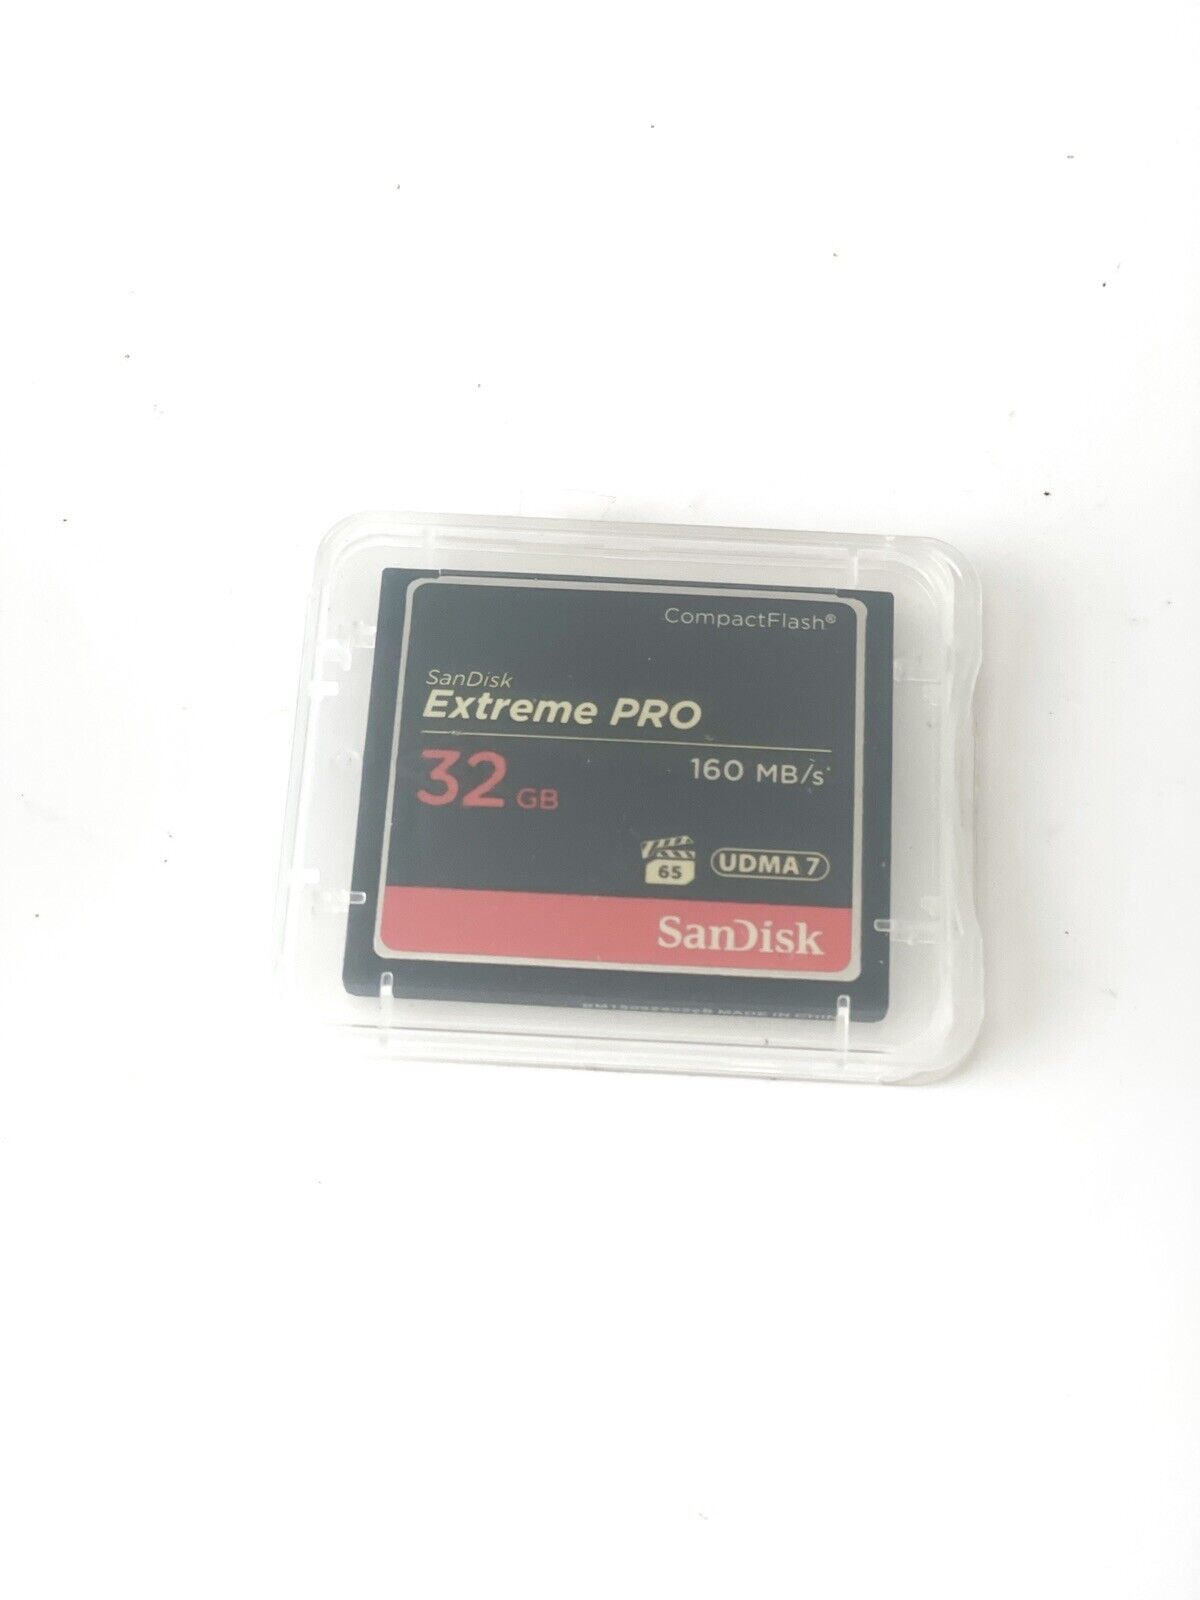 SanDisk 32gb CF Extreme Pro Compact Flash Memory Card 160mb/s Sdcfxps-032g  for sale online | eBay